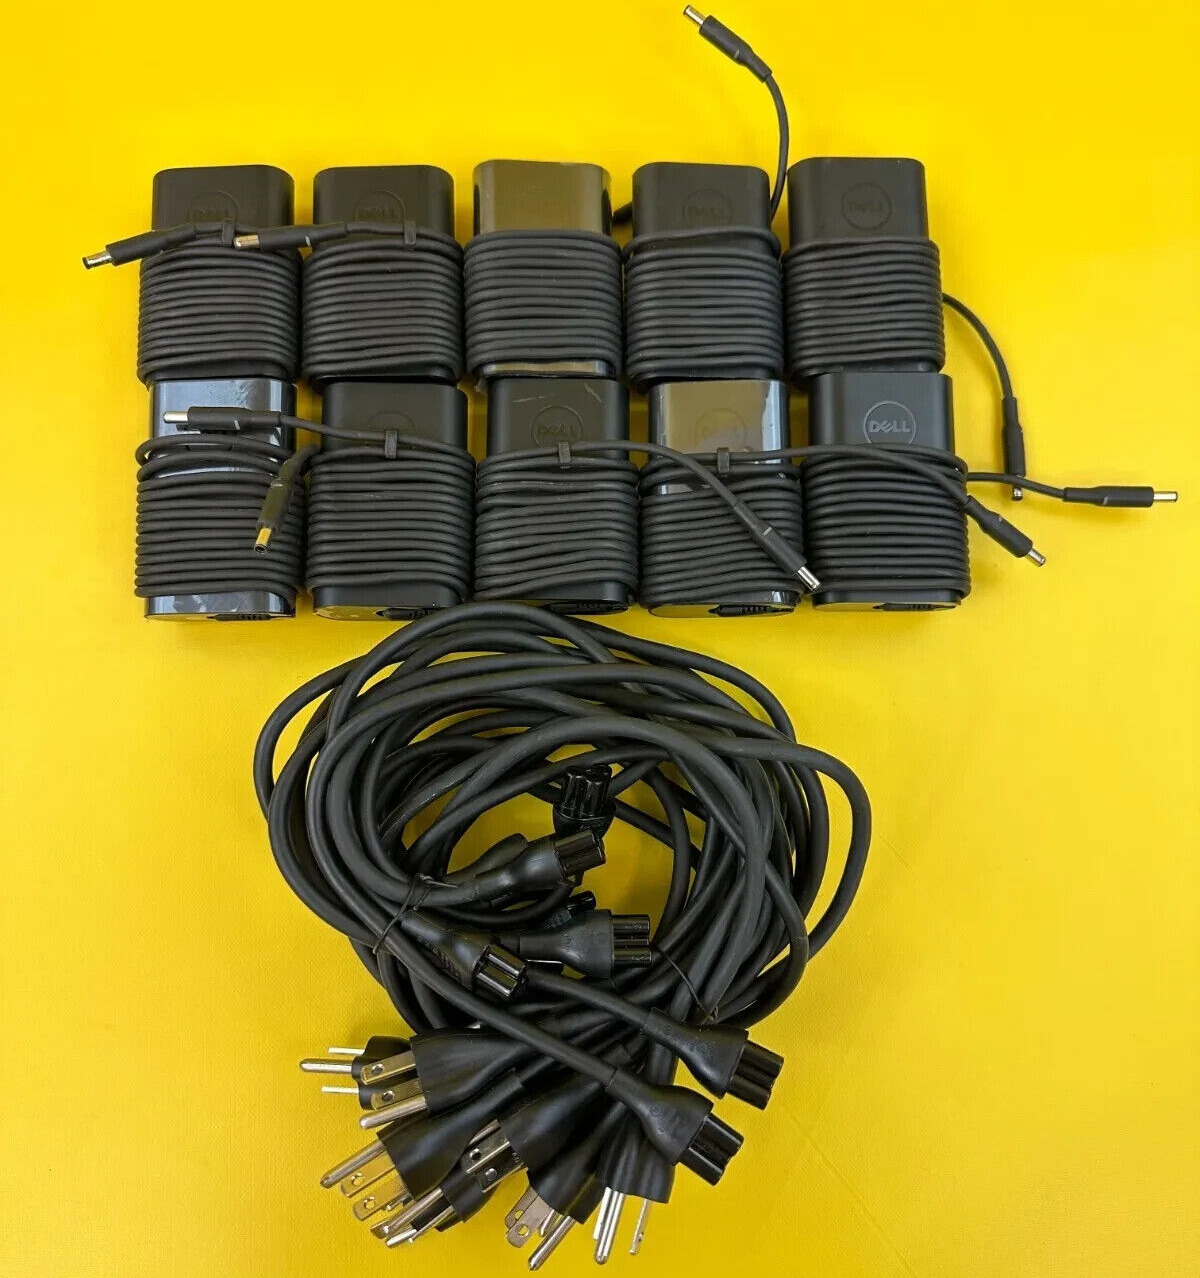 Lot of 10x Genuine Dell 45W Laptop Charger Tiny Small Tip AC Power Adapter Cord